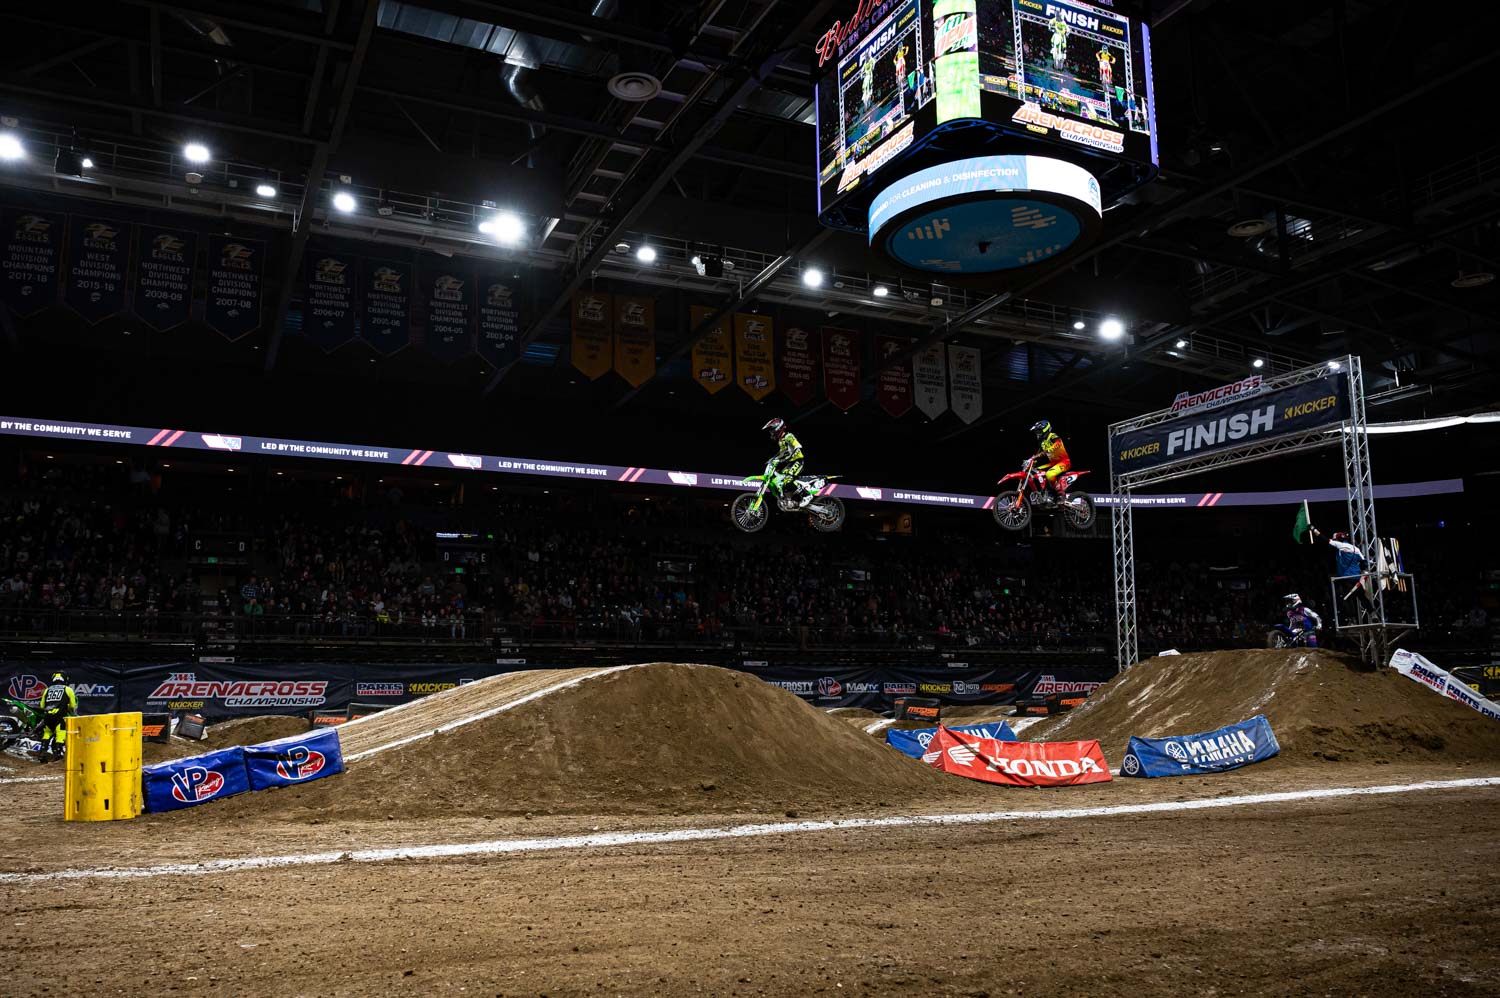 The+Thirst+for+First%3A+American+Motorcycle+Association+Arenacross+Championship+2023